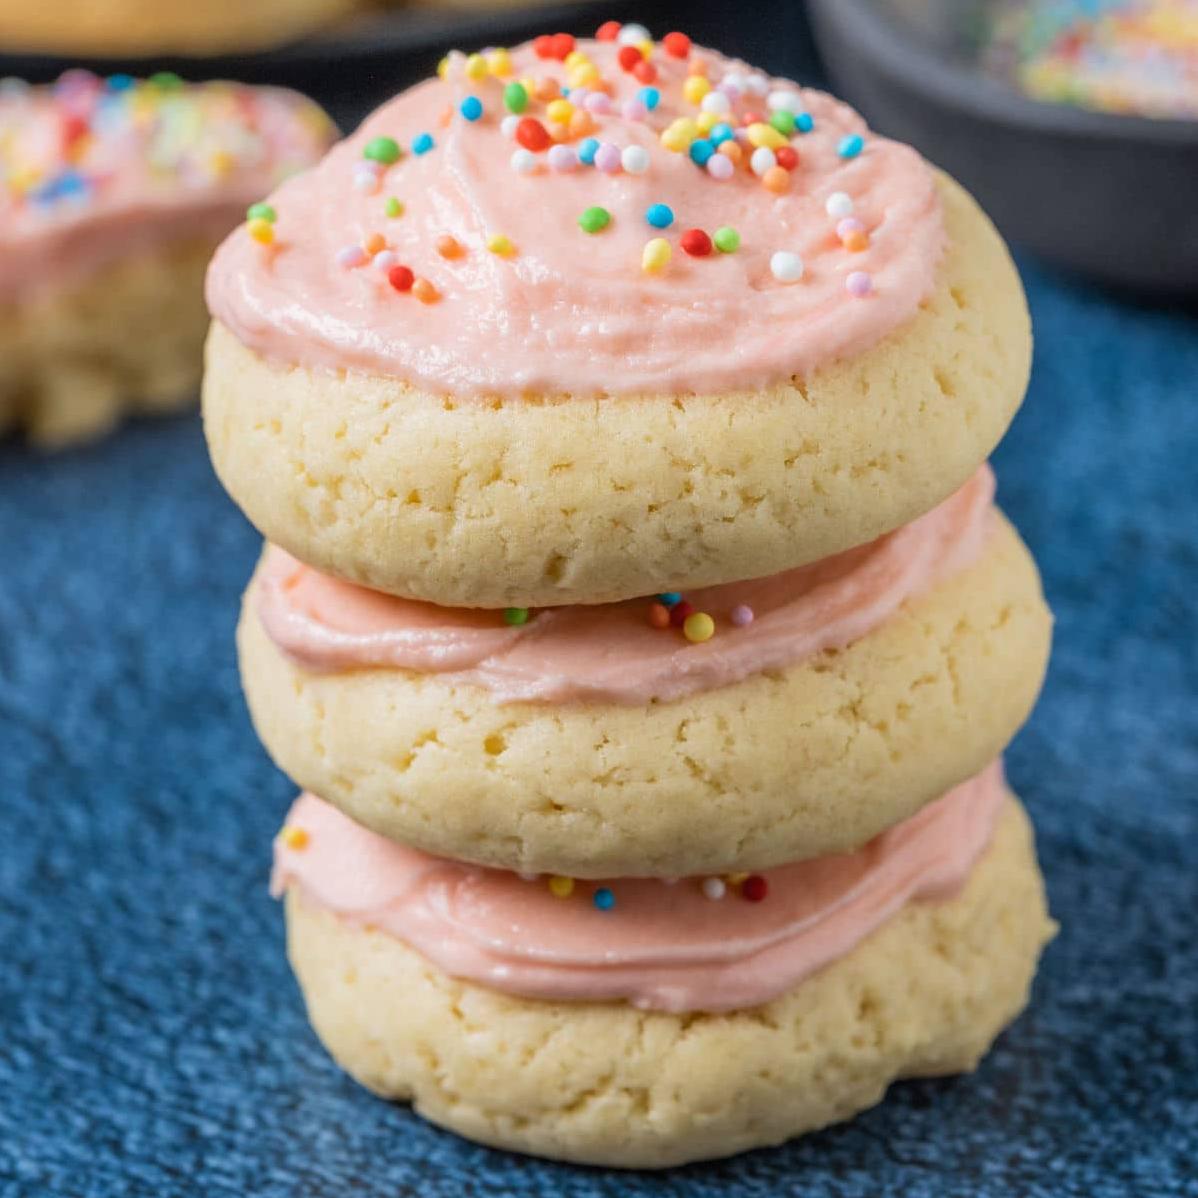  Get cozy with these vegan sugar cookies and a cup of tea.